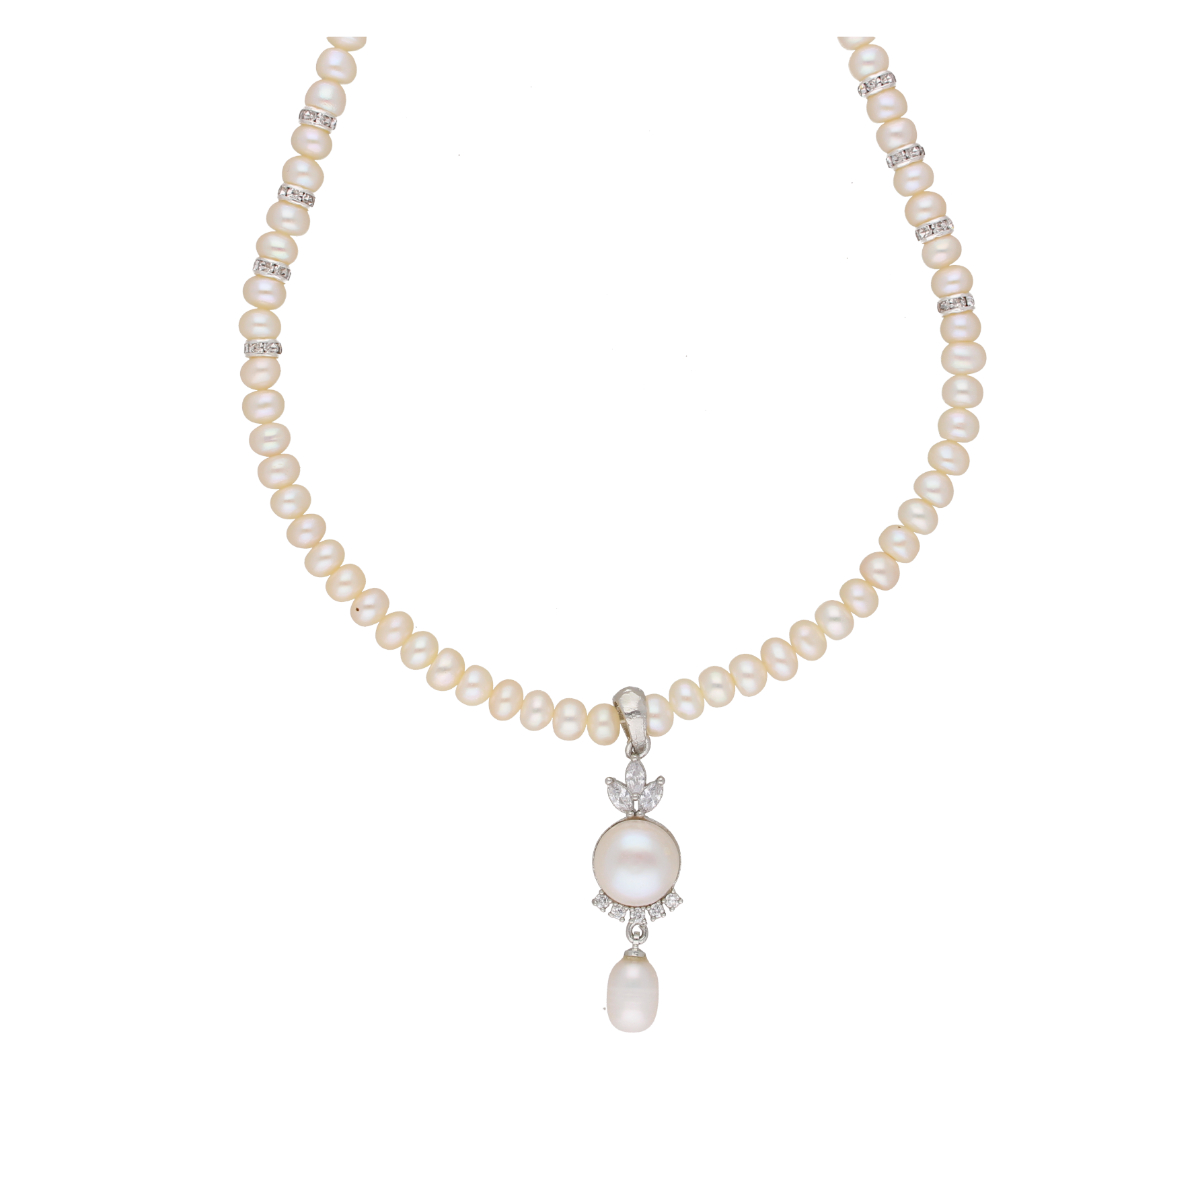 Buy Sri Jagdamba Pearls Dealer Freshwater White Pearl Pendant Necklace set  | Necklace to Gift Women & Girls| With Pearls Certificate of Authenticity  at Amazon.in